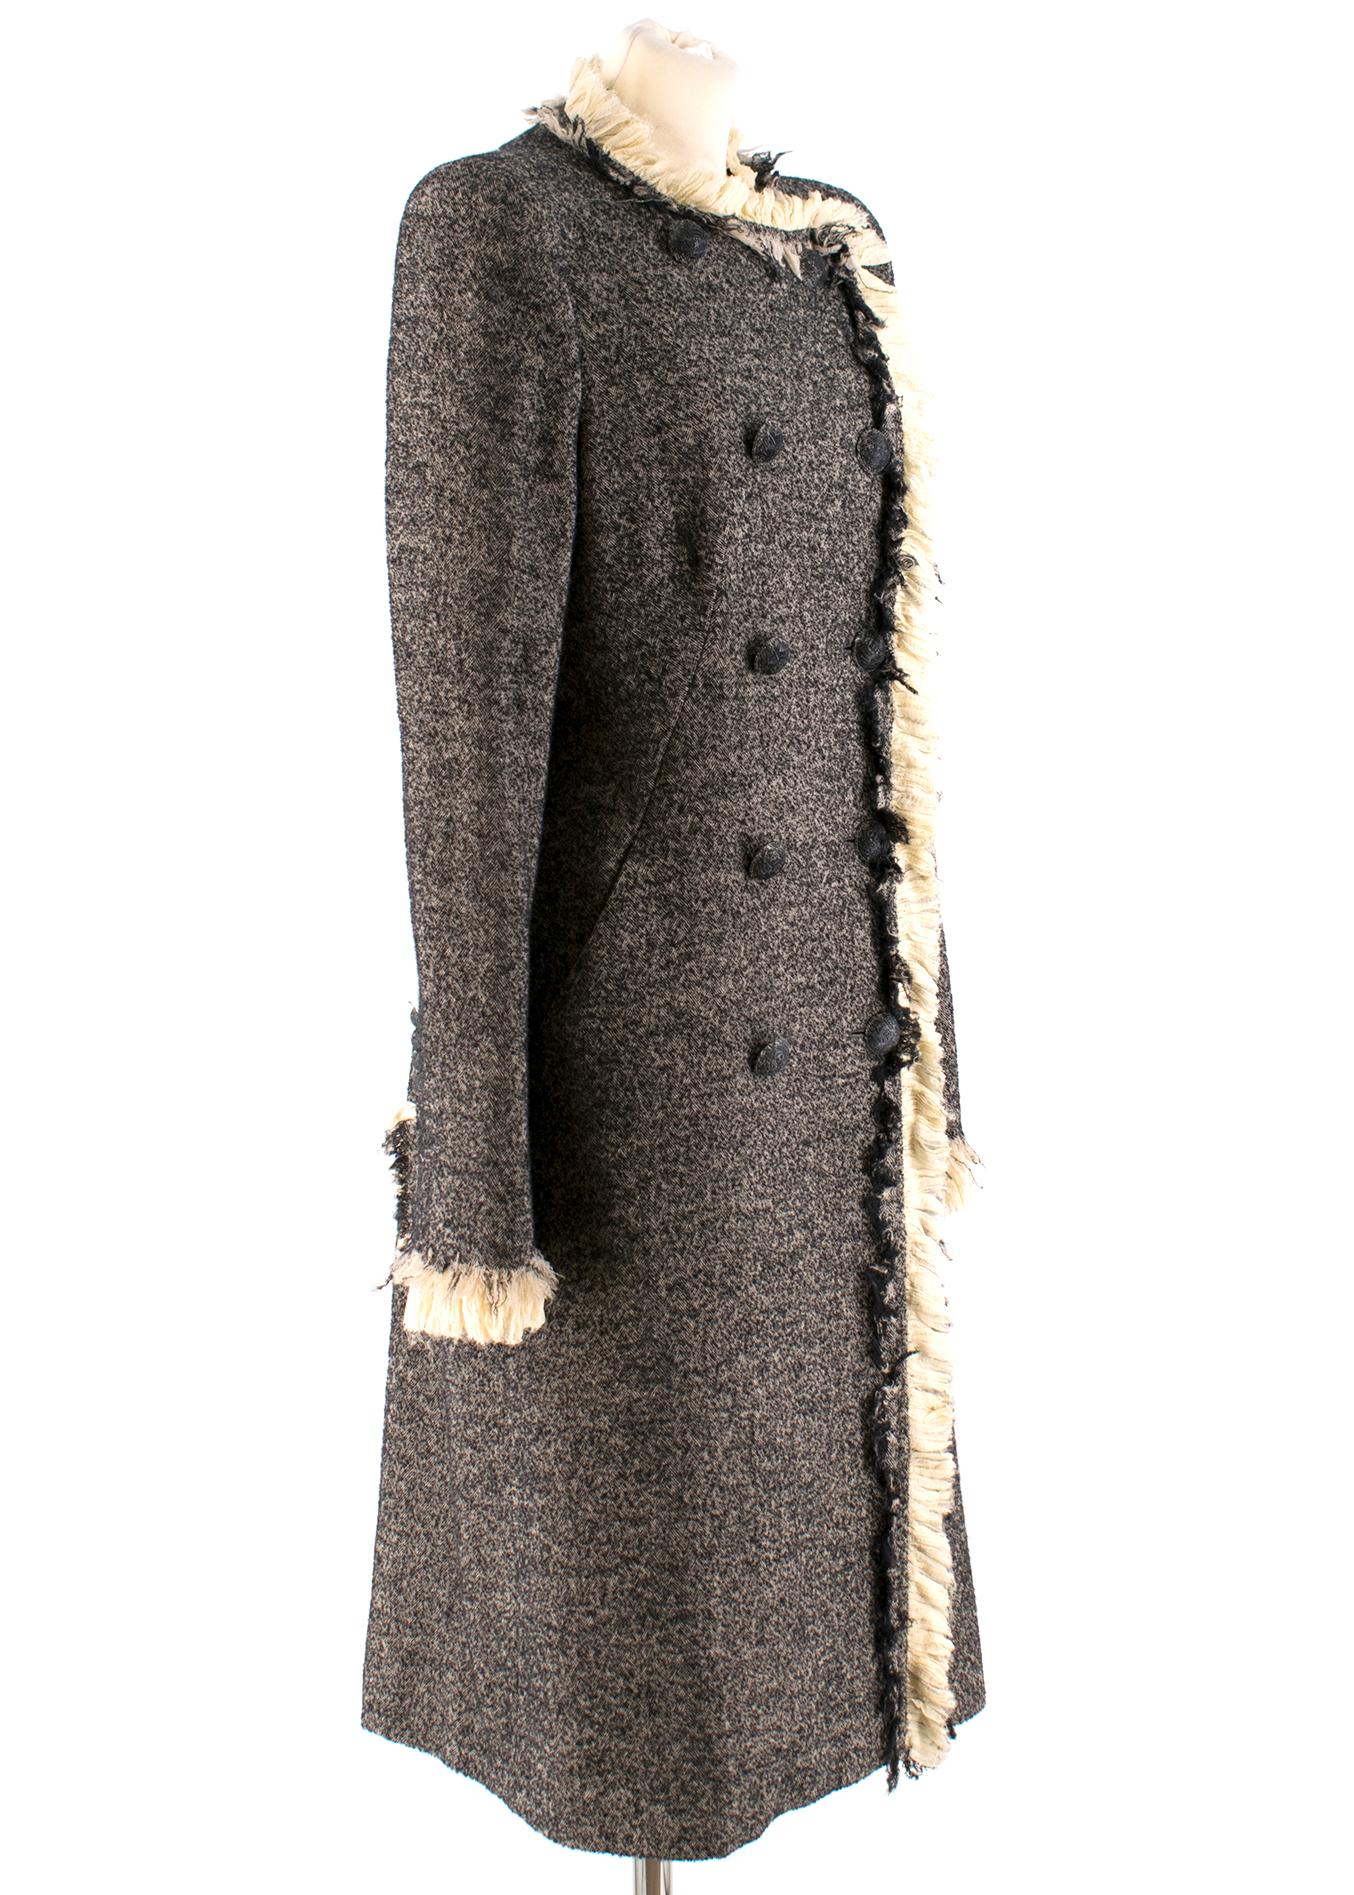 Alexander McQueen Long Wool-blend Tweed Coat

- Black, mid-weight tweed coat
- Ivory ruffle-trimmed chiffon neckline, placket and cuffs
- Centre-front black-tone button fastening
- Padded shoulders
- Slanted slip pockets

Please note, these items